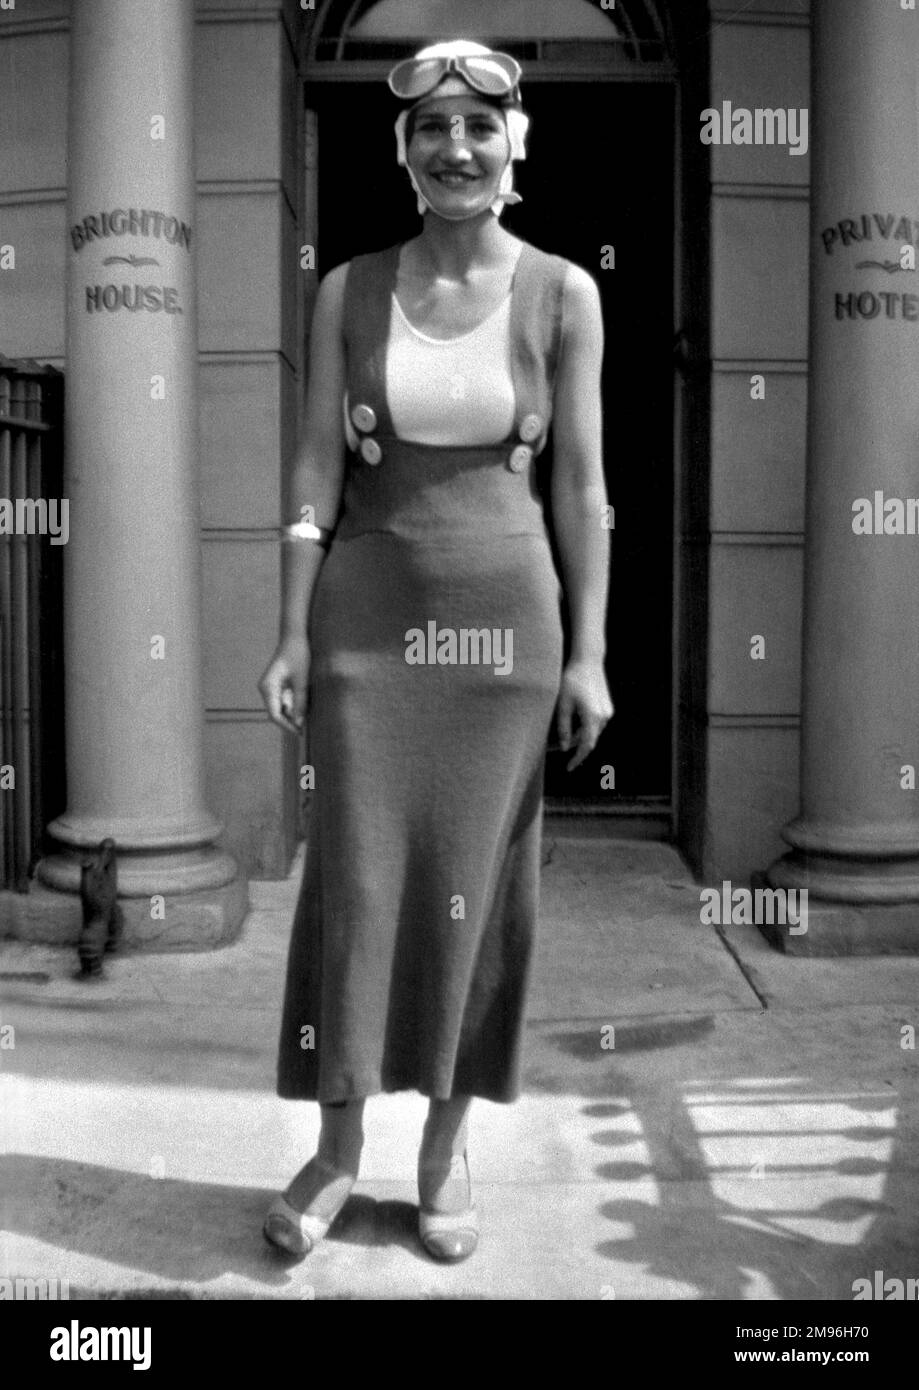 A smiling young woman wearing a woollen dress and goggles on her head stands outside Brighton House, a private hotel. Stock Photo